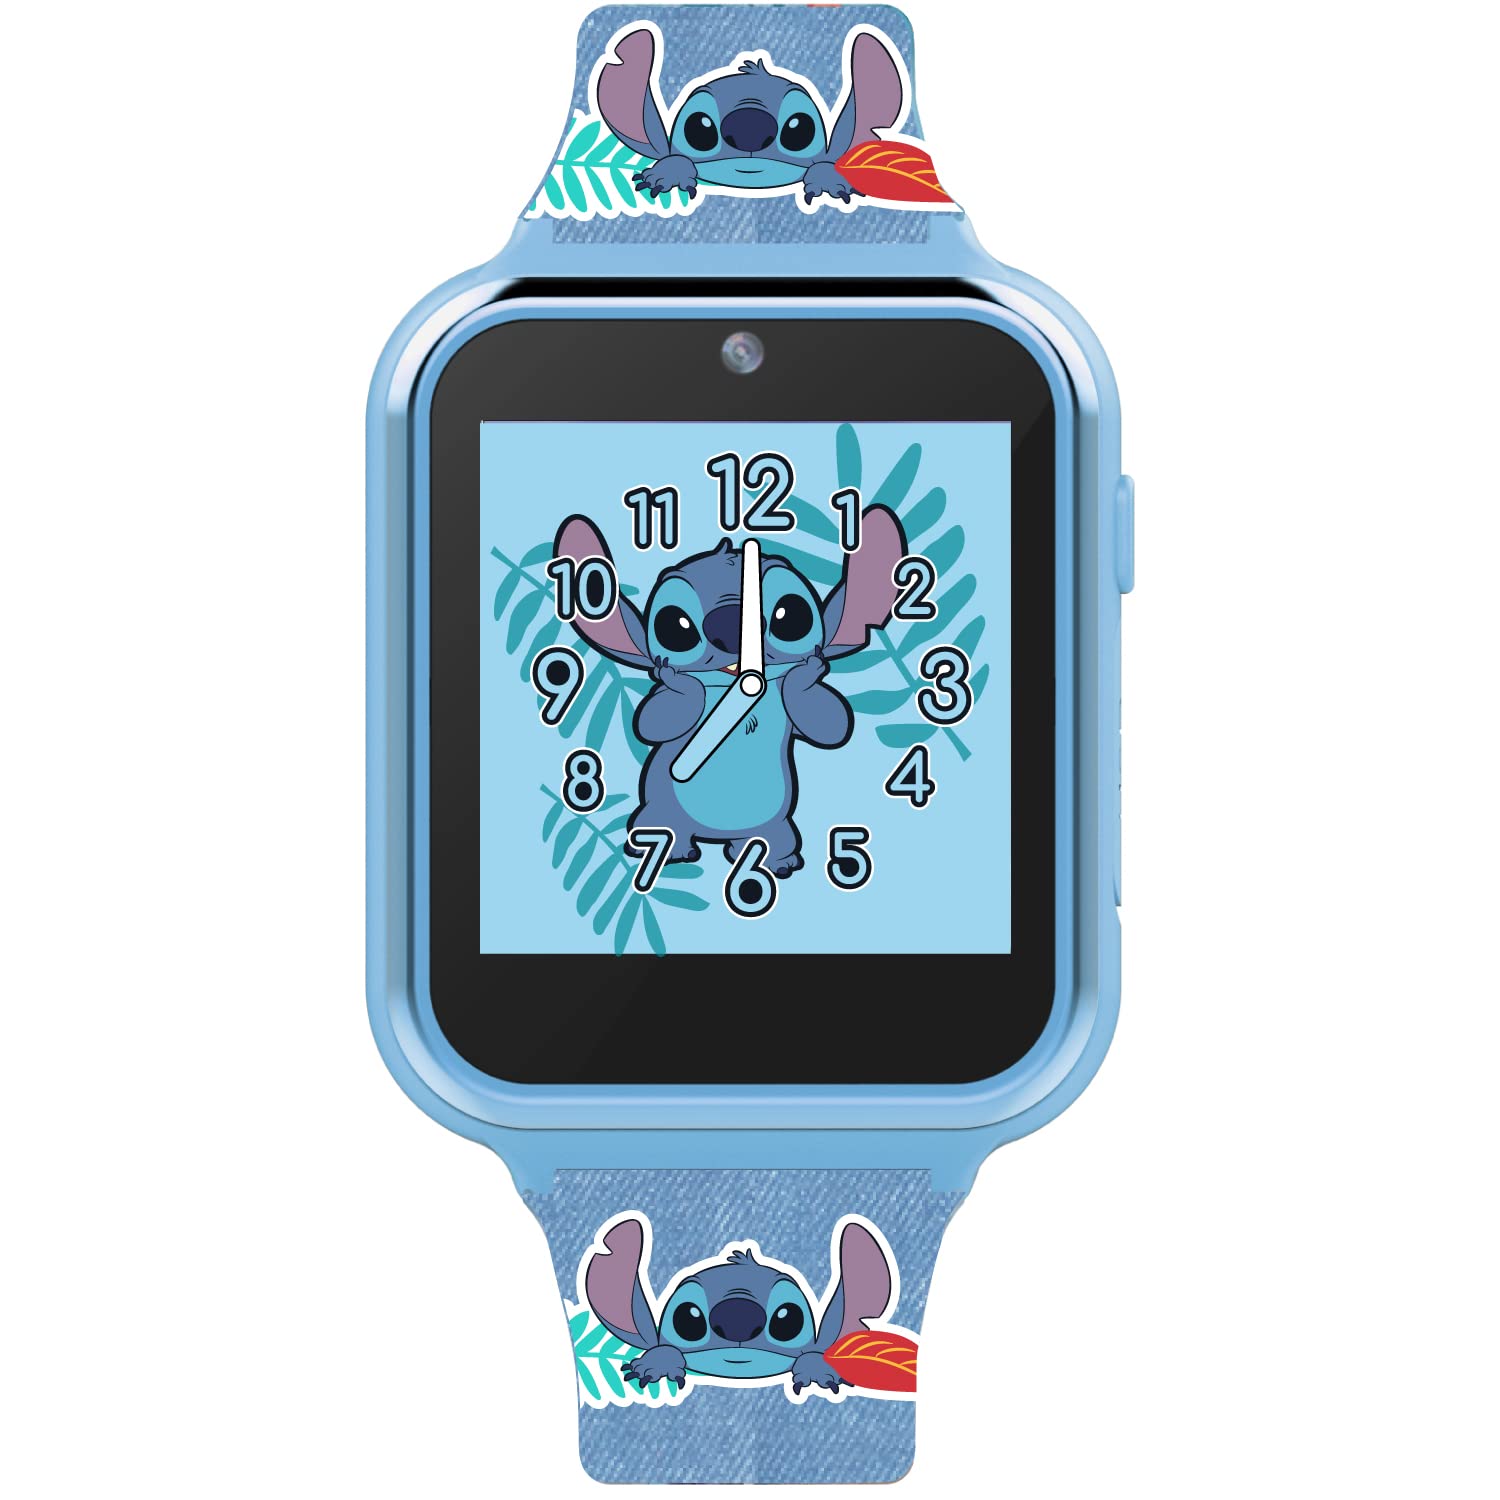 Accutime Kids Disney Lilo & Stitch Blue Educational Learning Touchscreen Smart Watch Toy for Girls, Boys, Toddlers - Selfie Cam, Learning Games, Alarm, Calculator, Pedometer & More (Model: LAS4024AZ)